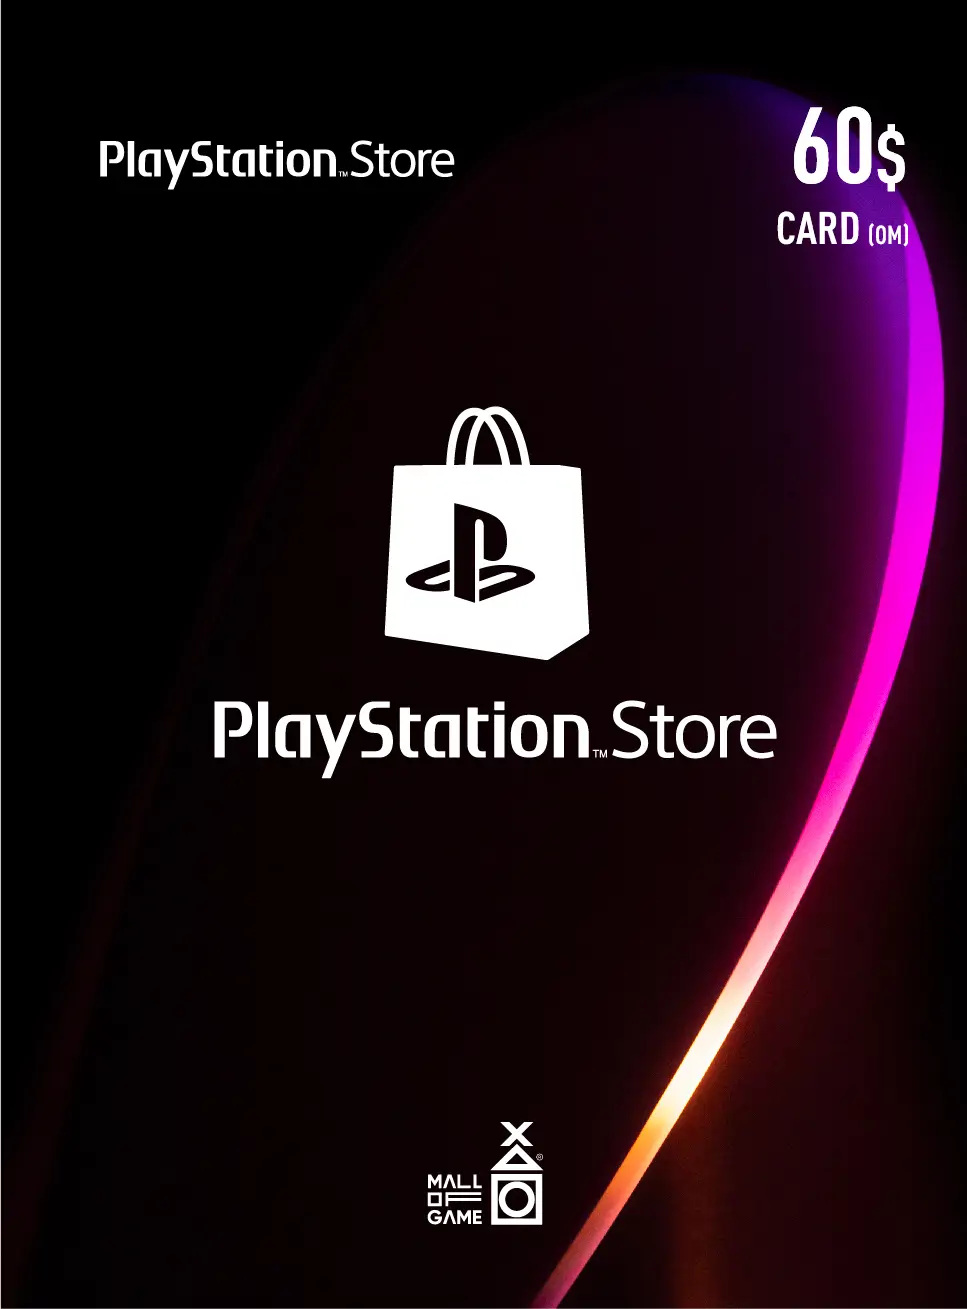 PlayStation™Store USD60 Gift Cards (OM)